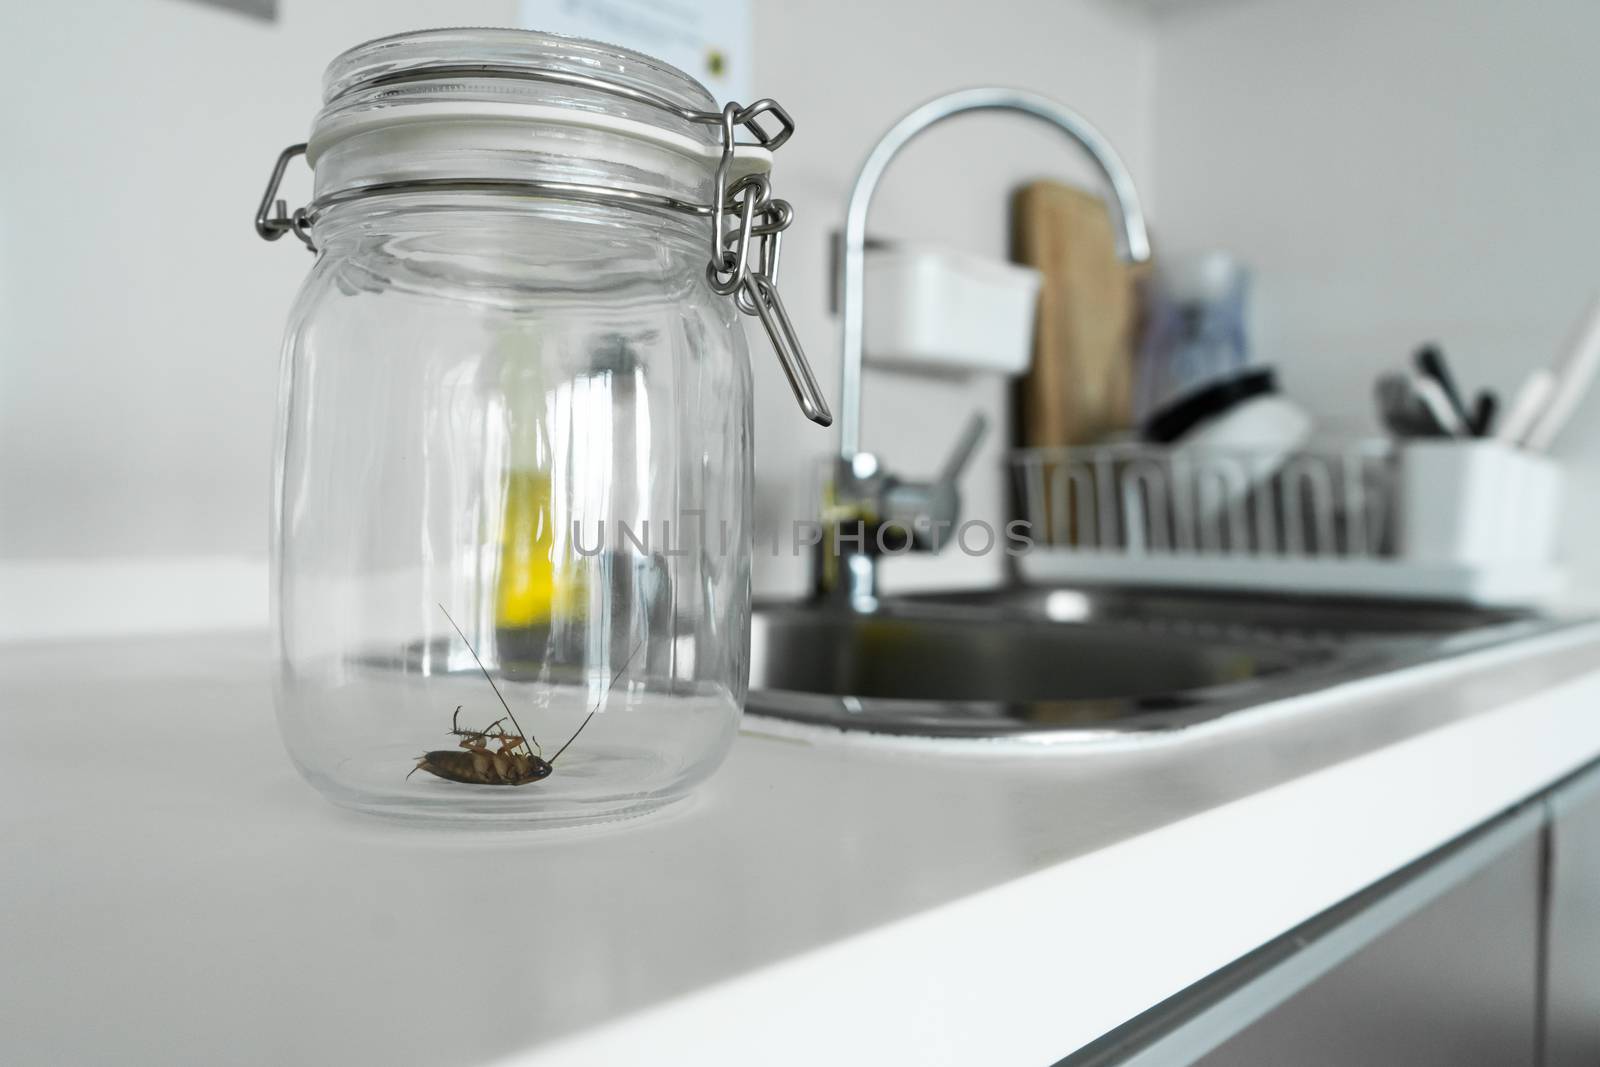 Cockroach in a glass jar in the kitchen.